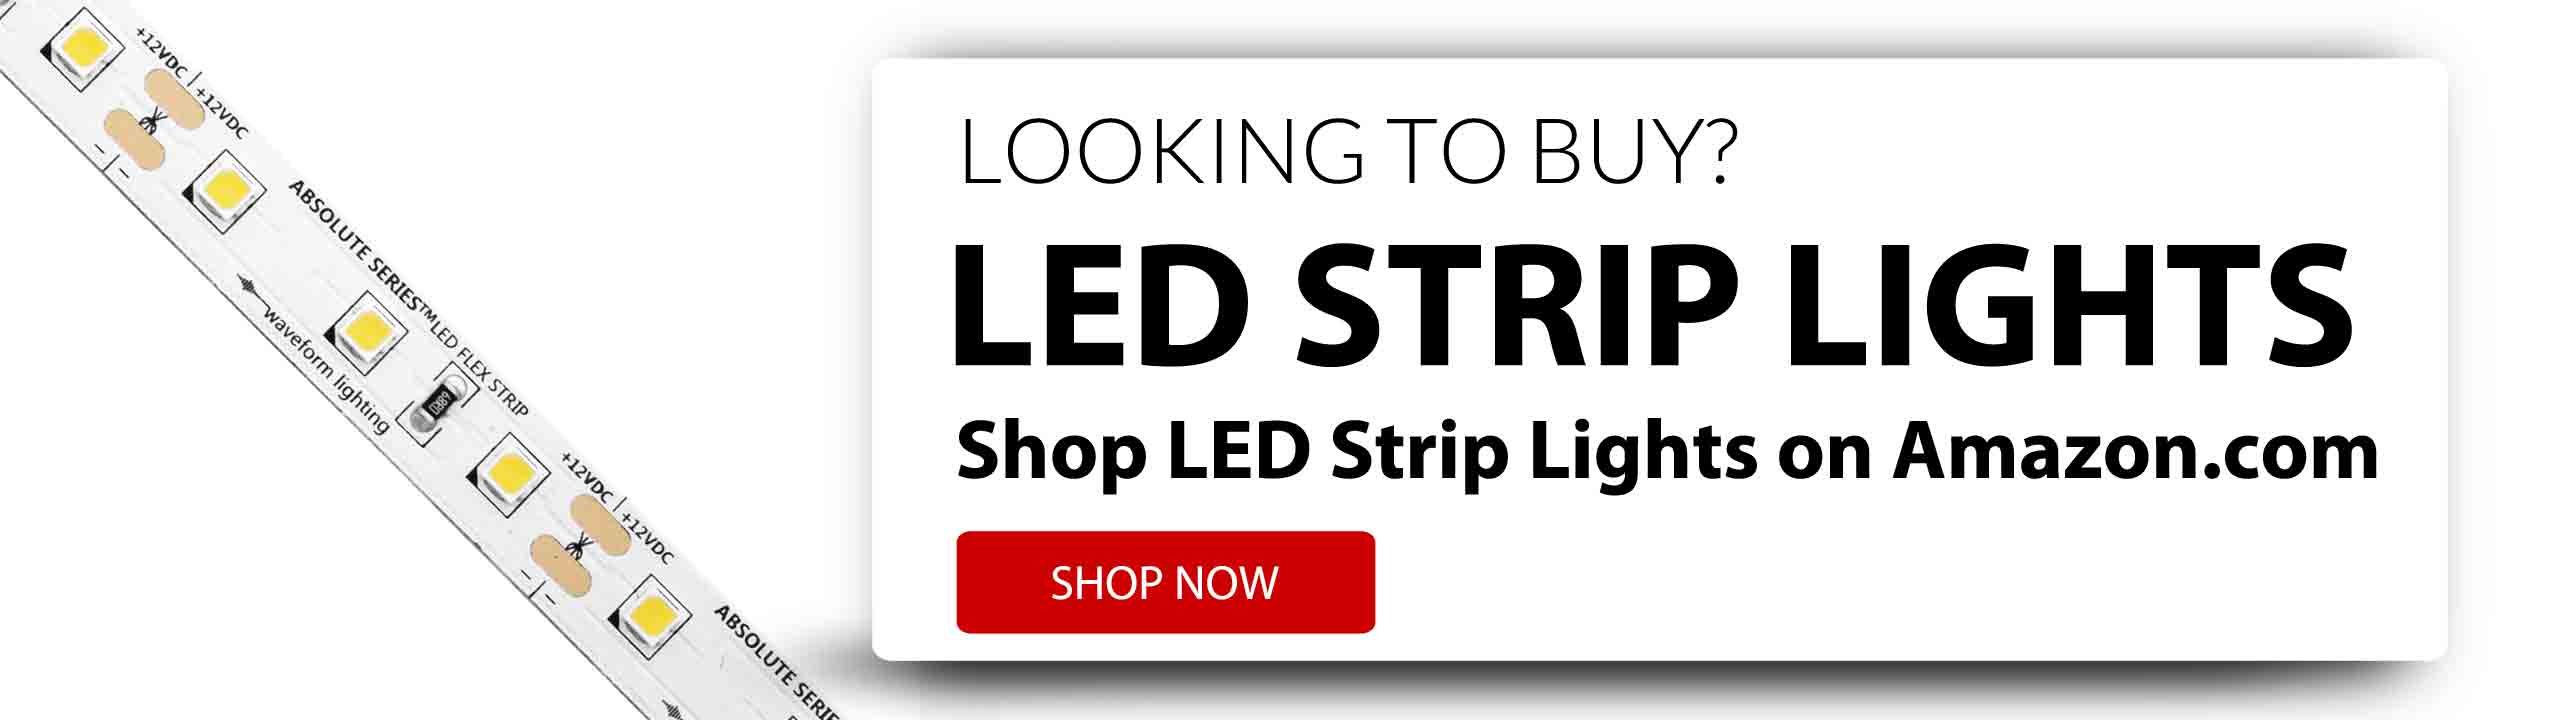 How to choose a power supply for your LED strip project